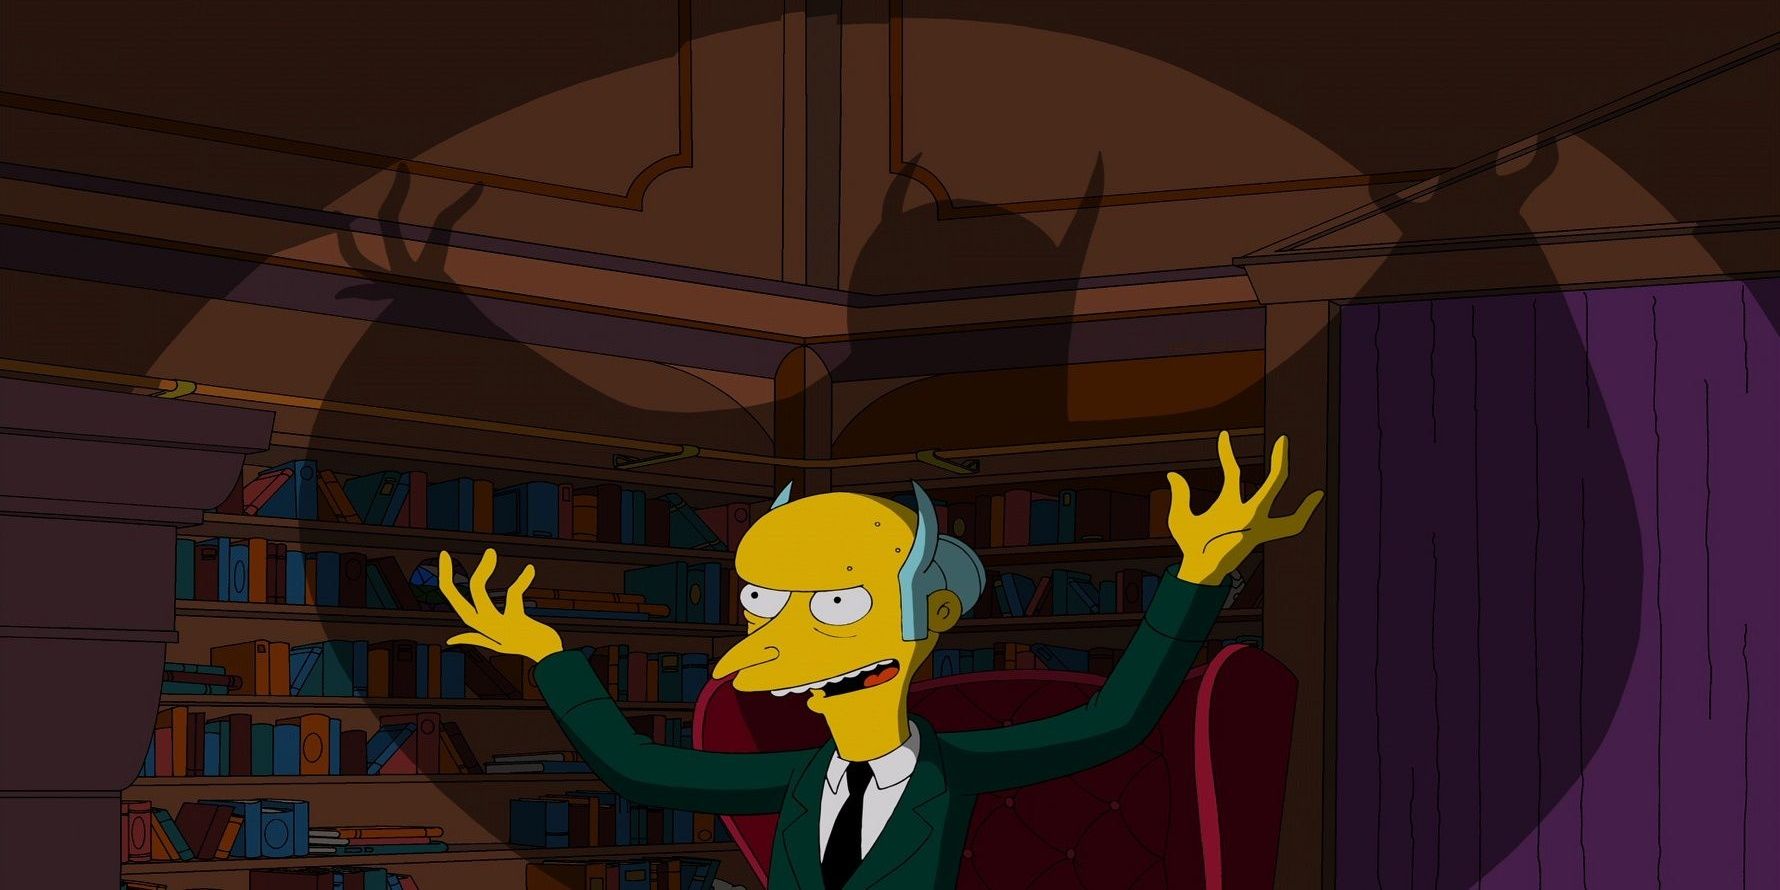 Mister Montgomery burns the Simpsons sitting on a chair.